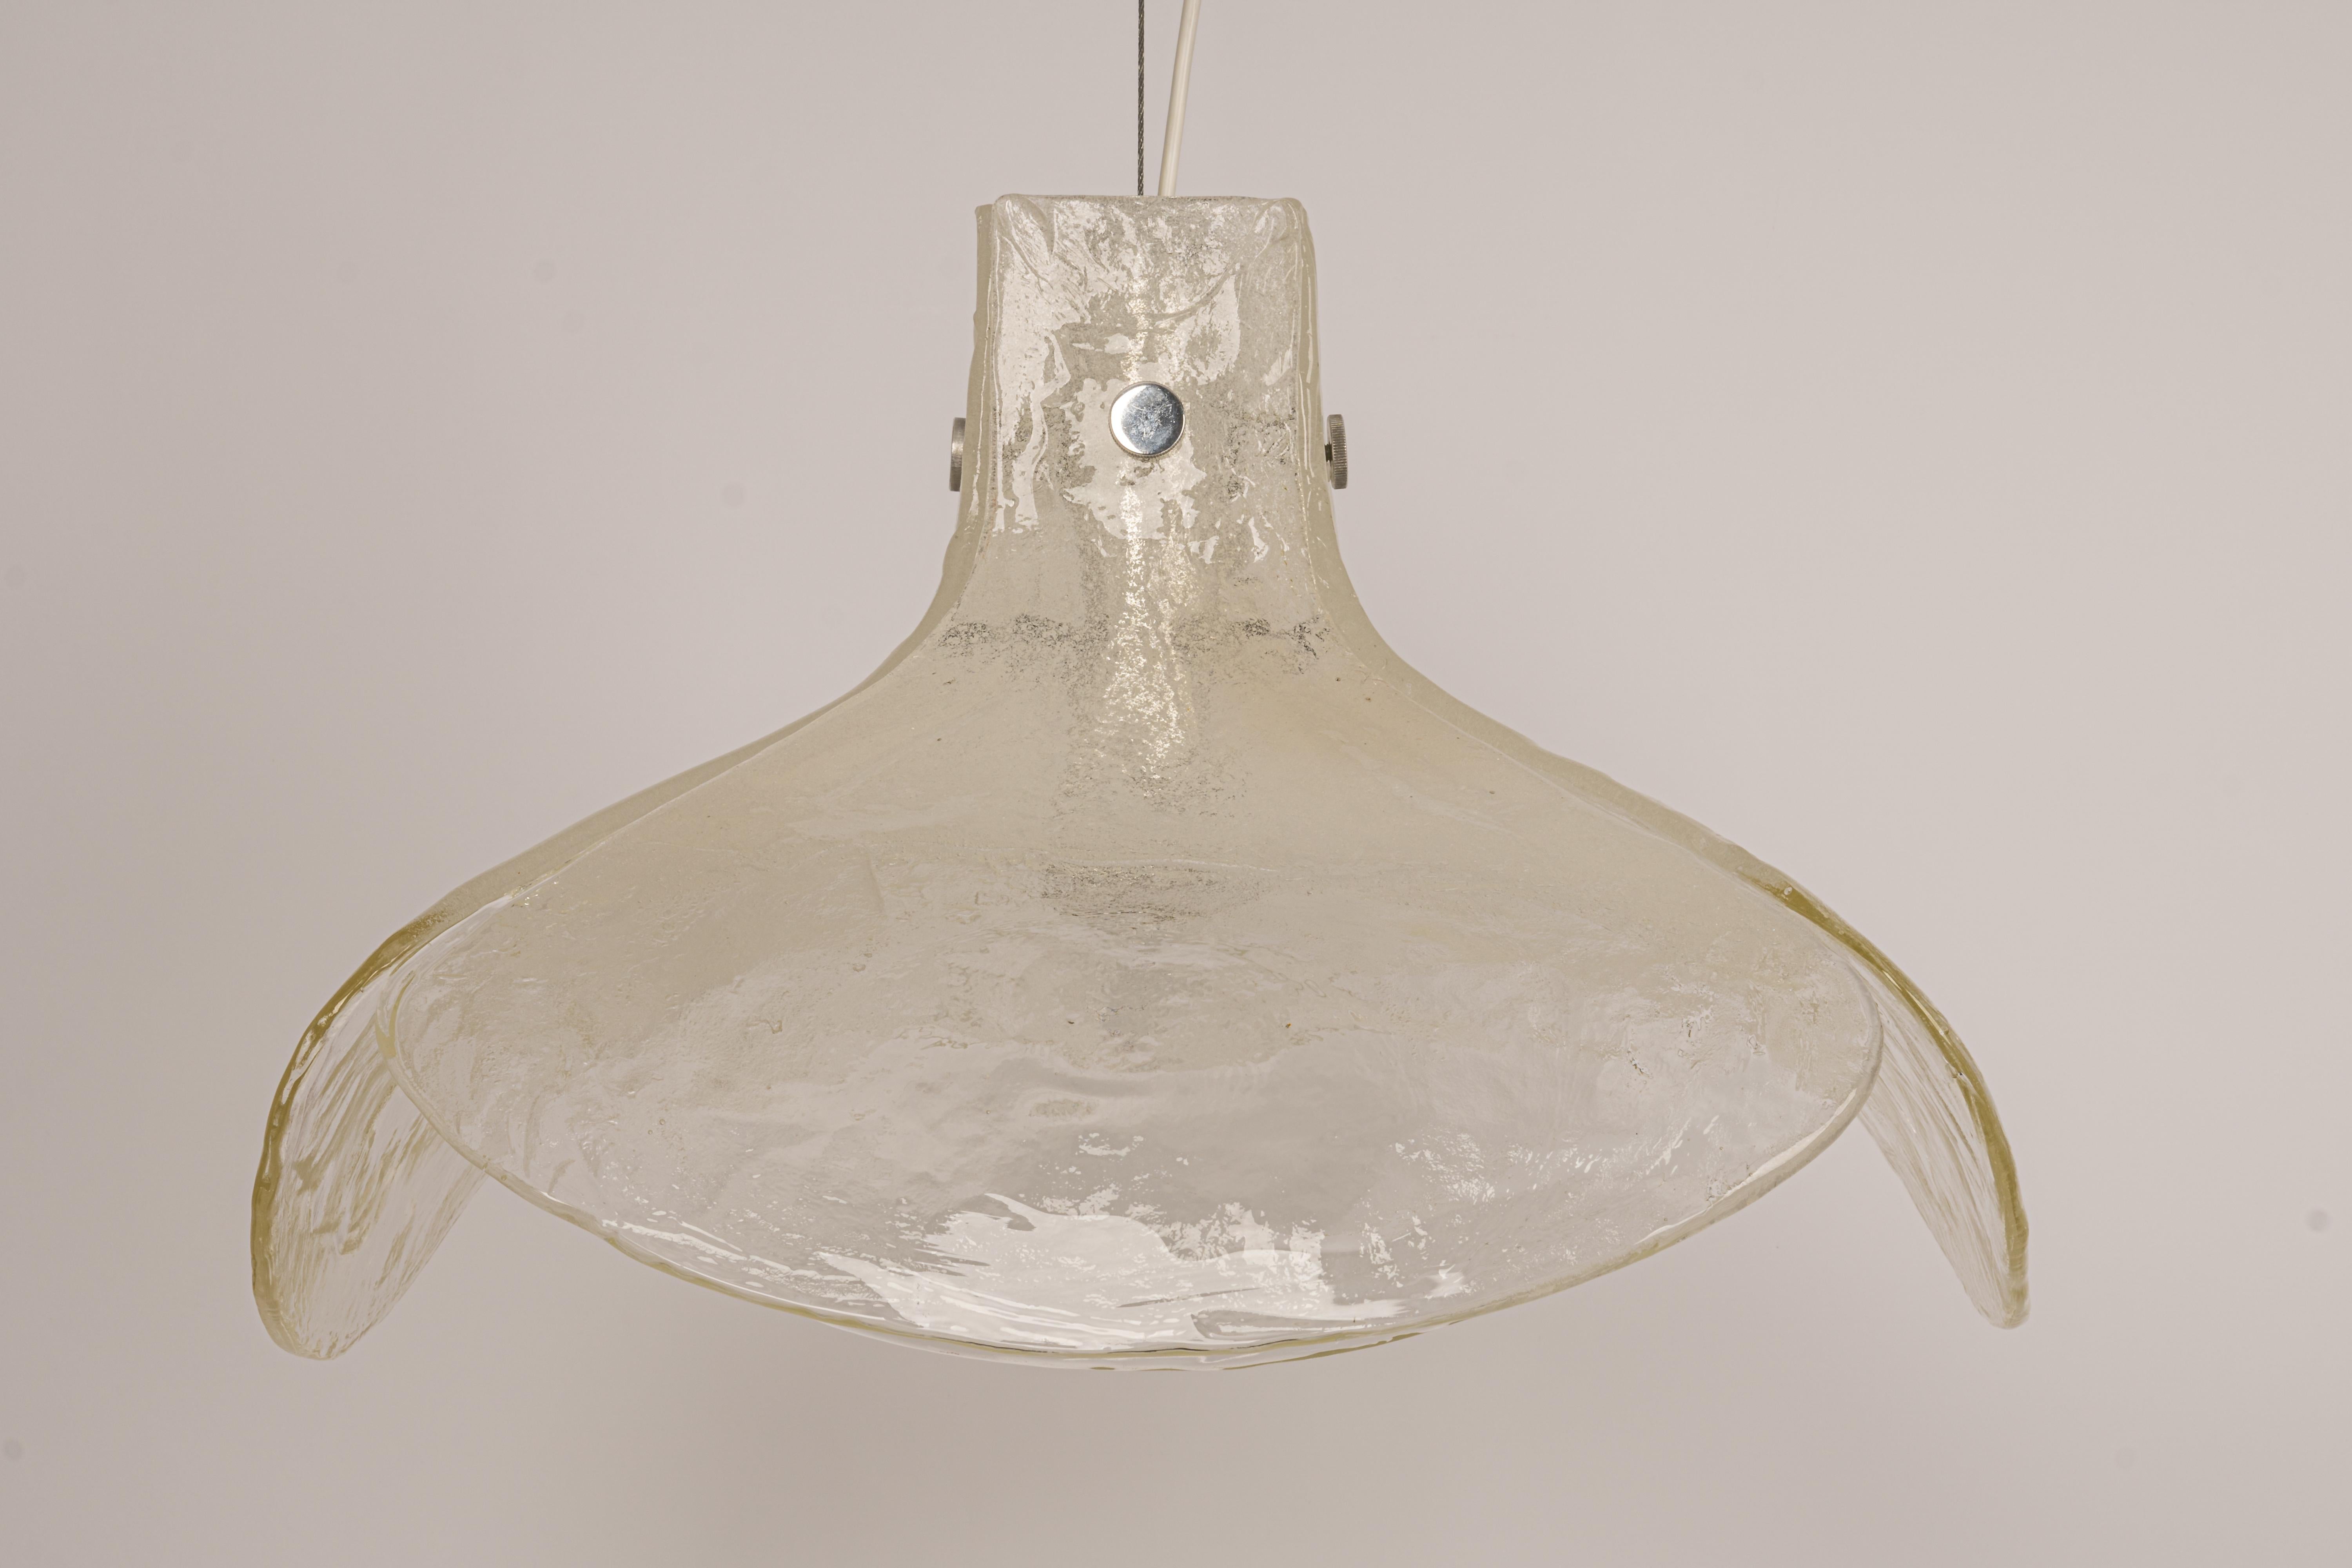 A stunning large Murano white glass chandelier designed by Kalmar, Austria manufactured in the 1960s.
The chandelier is composed of 4 thick Murano glass elements attached to a metal frame.

High quality and in very good condition. Cleaned,